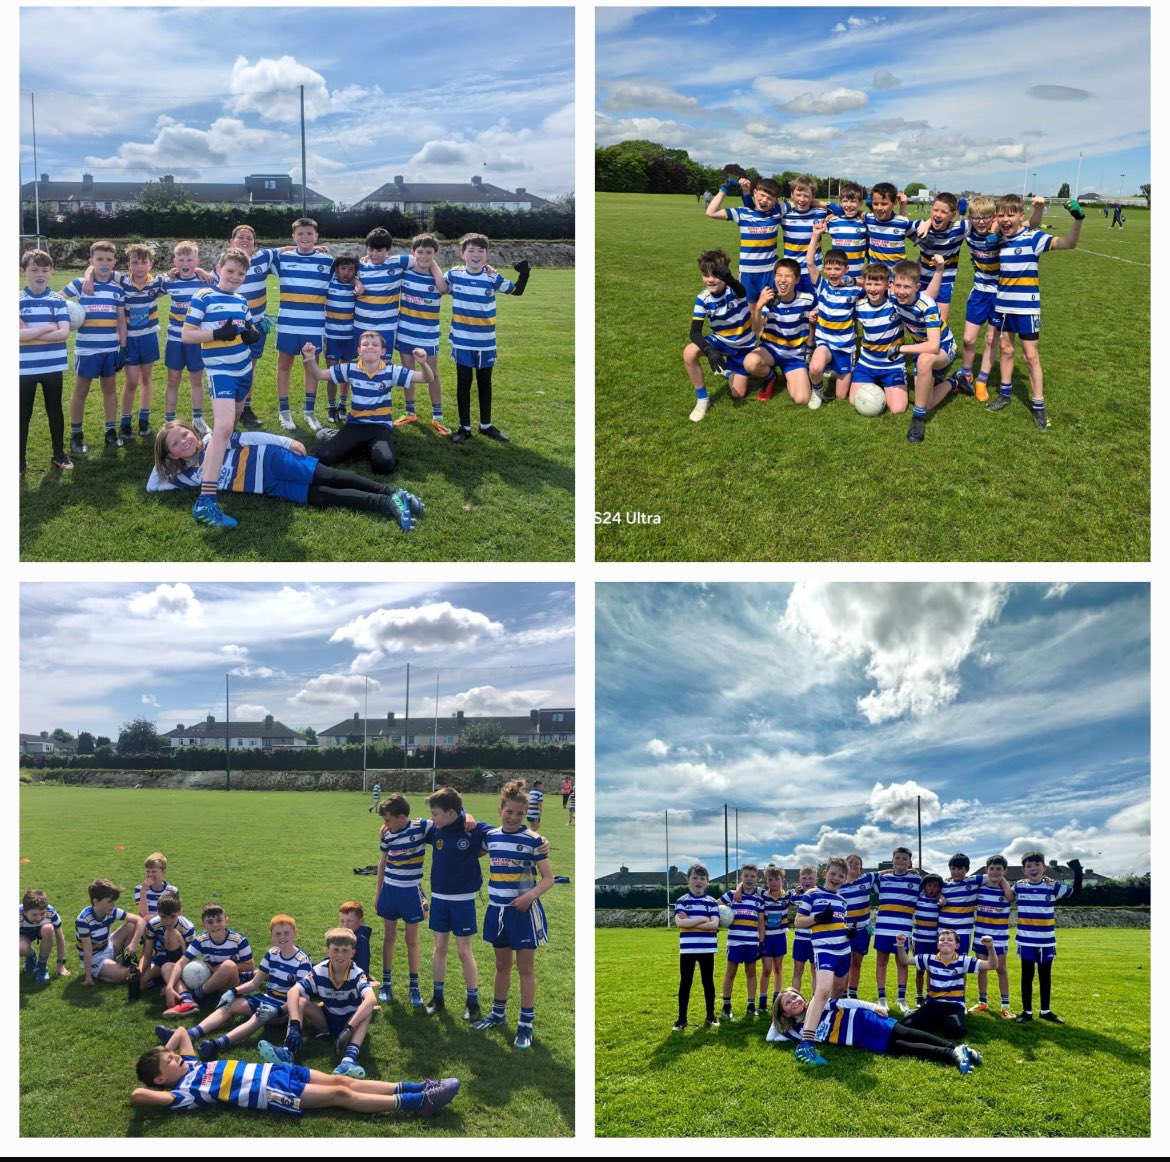 A good day for all 4 U11 boys teams in Dolphin Park  sunshine this morning #futurestars #tss